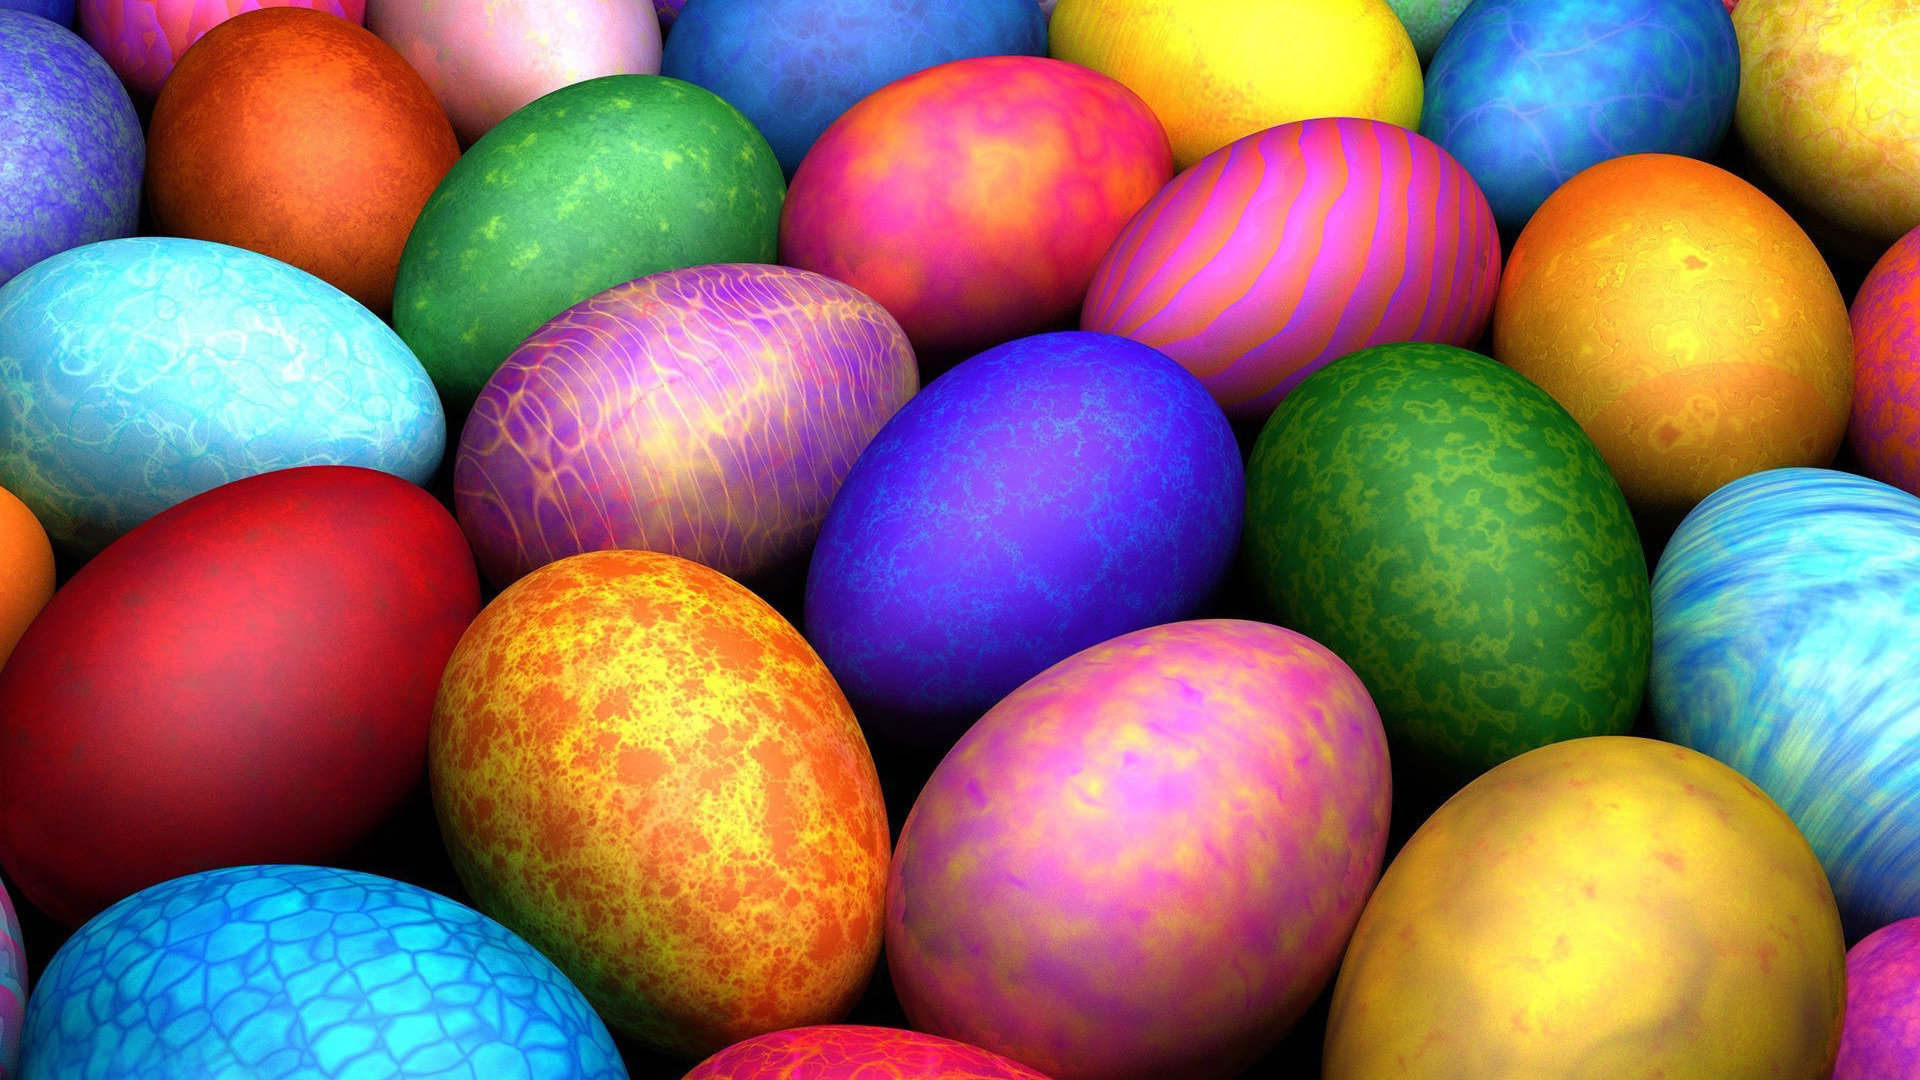 Free Easter high quality wallpaper ID:324674 for hd 1920x1080 desktop